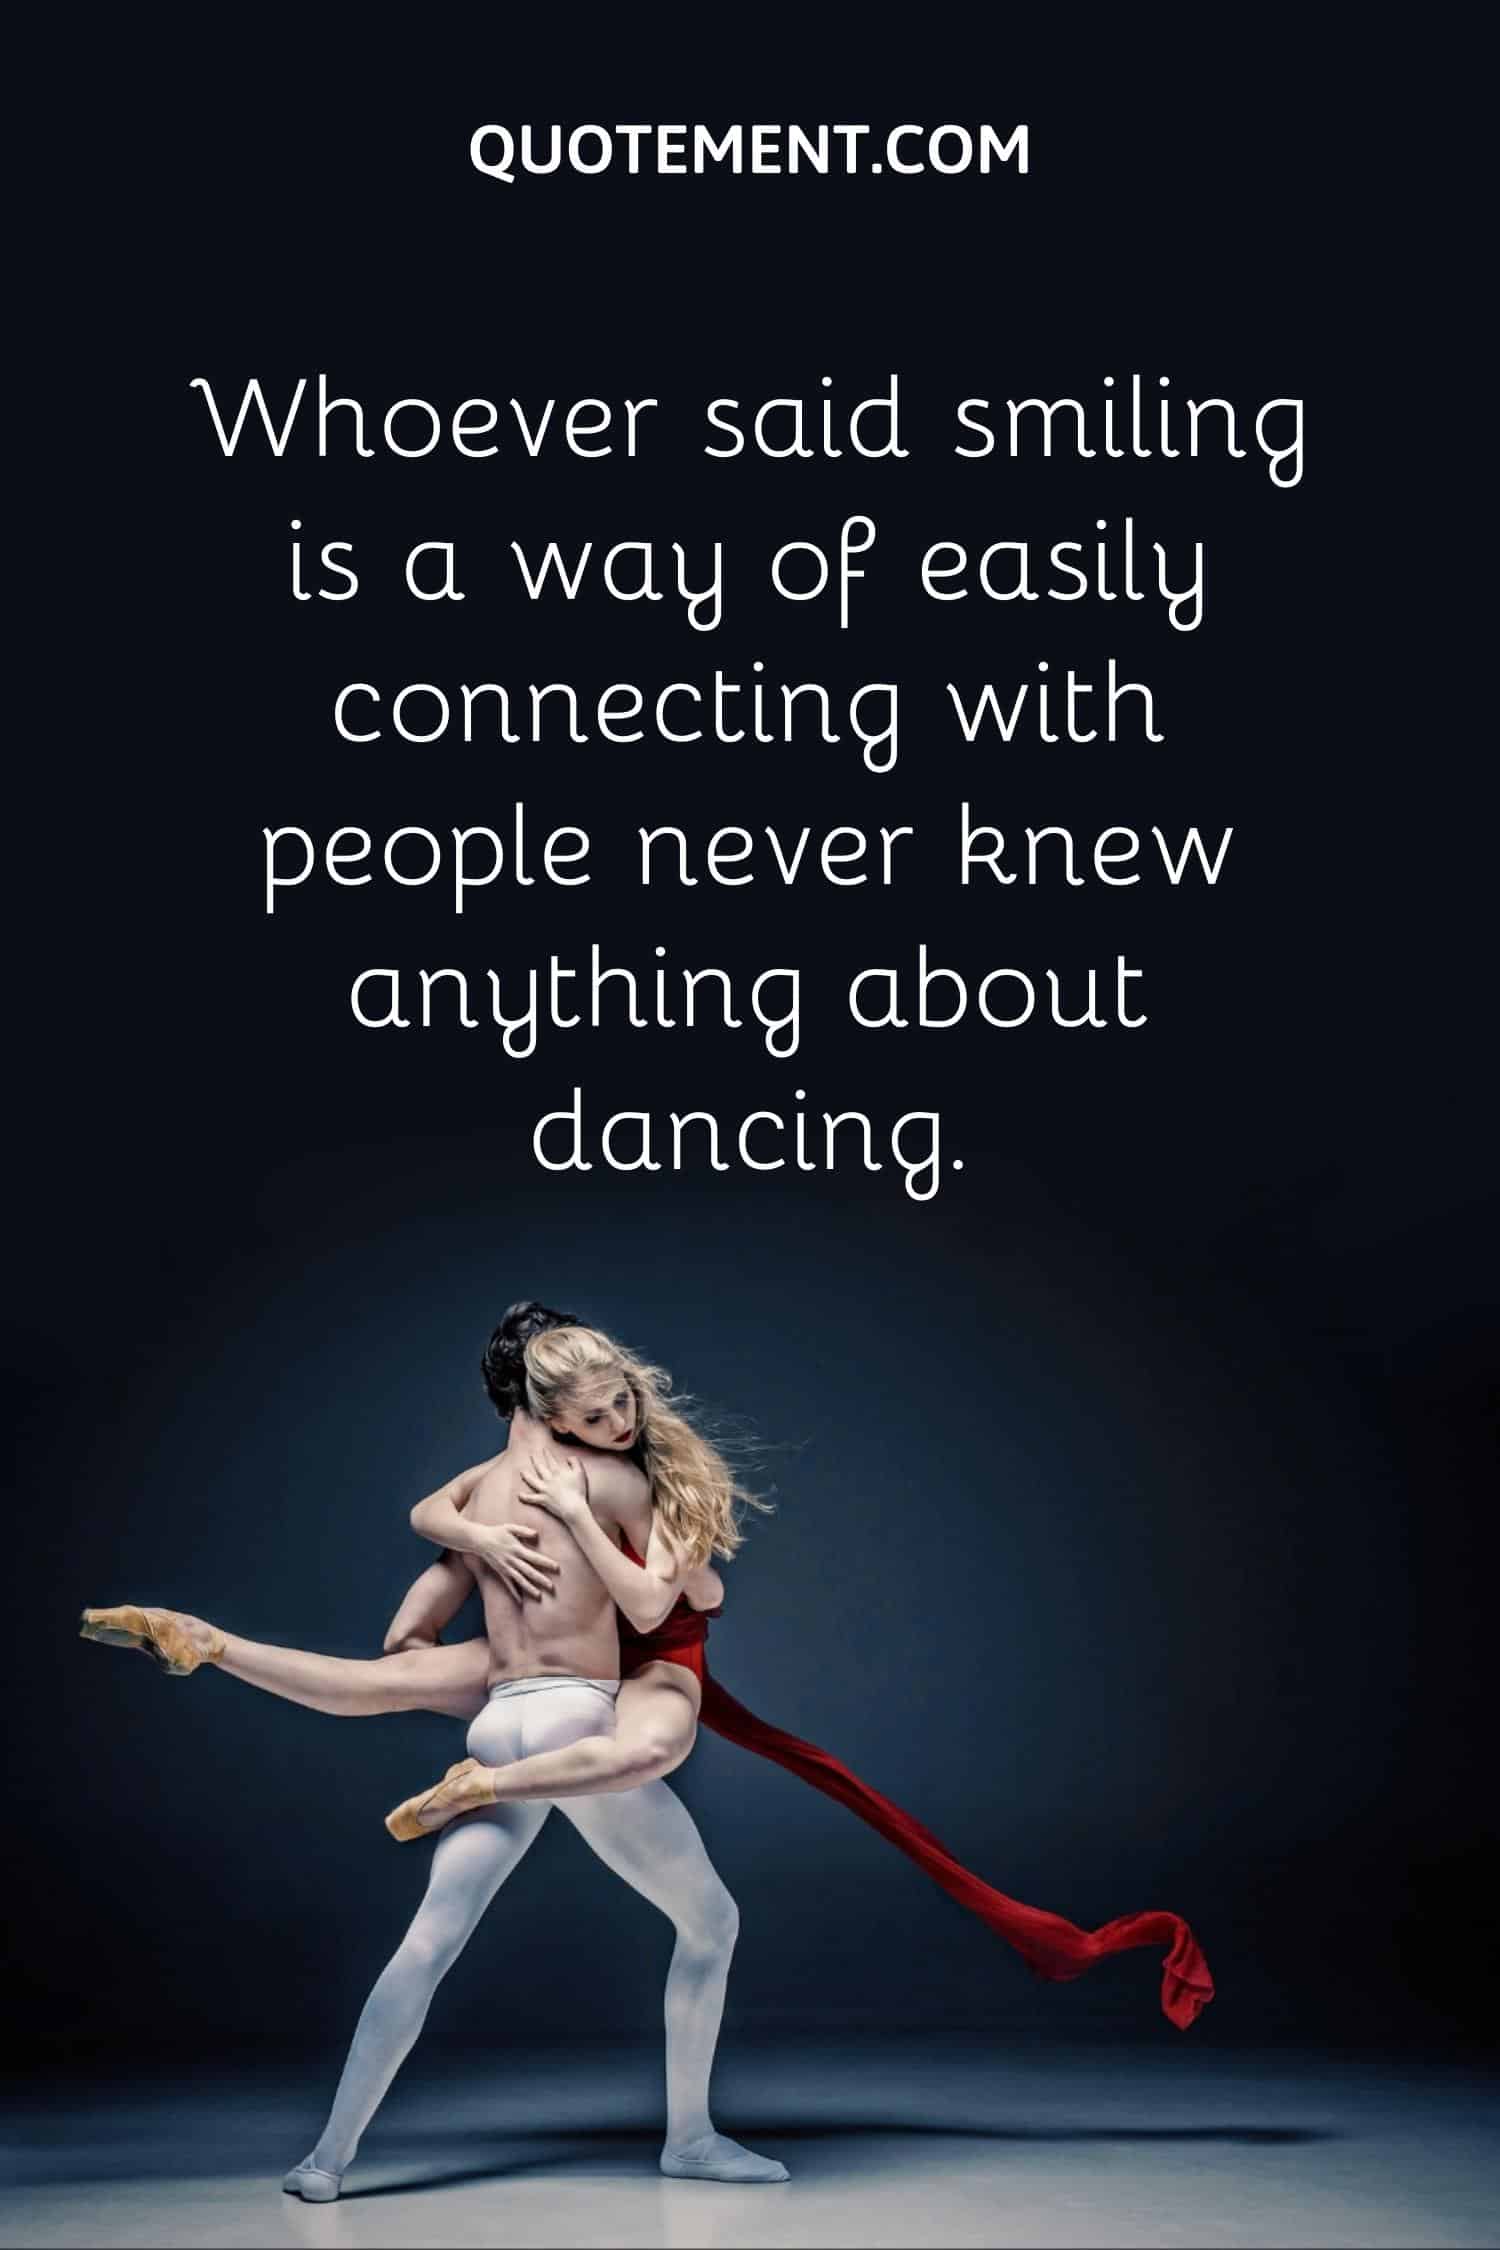 Whoever said smiling is a way of easily connecting with people never knew anything about dancing